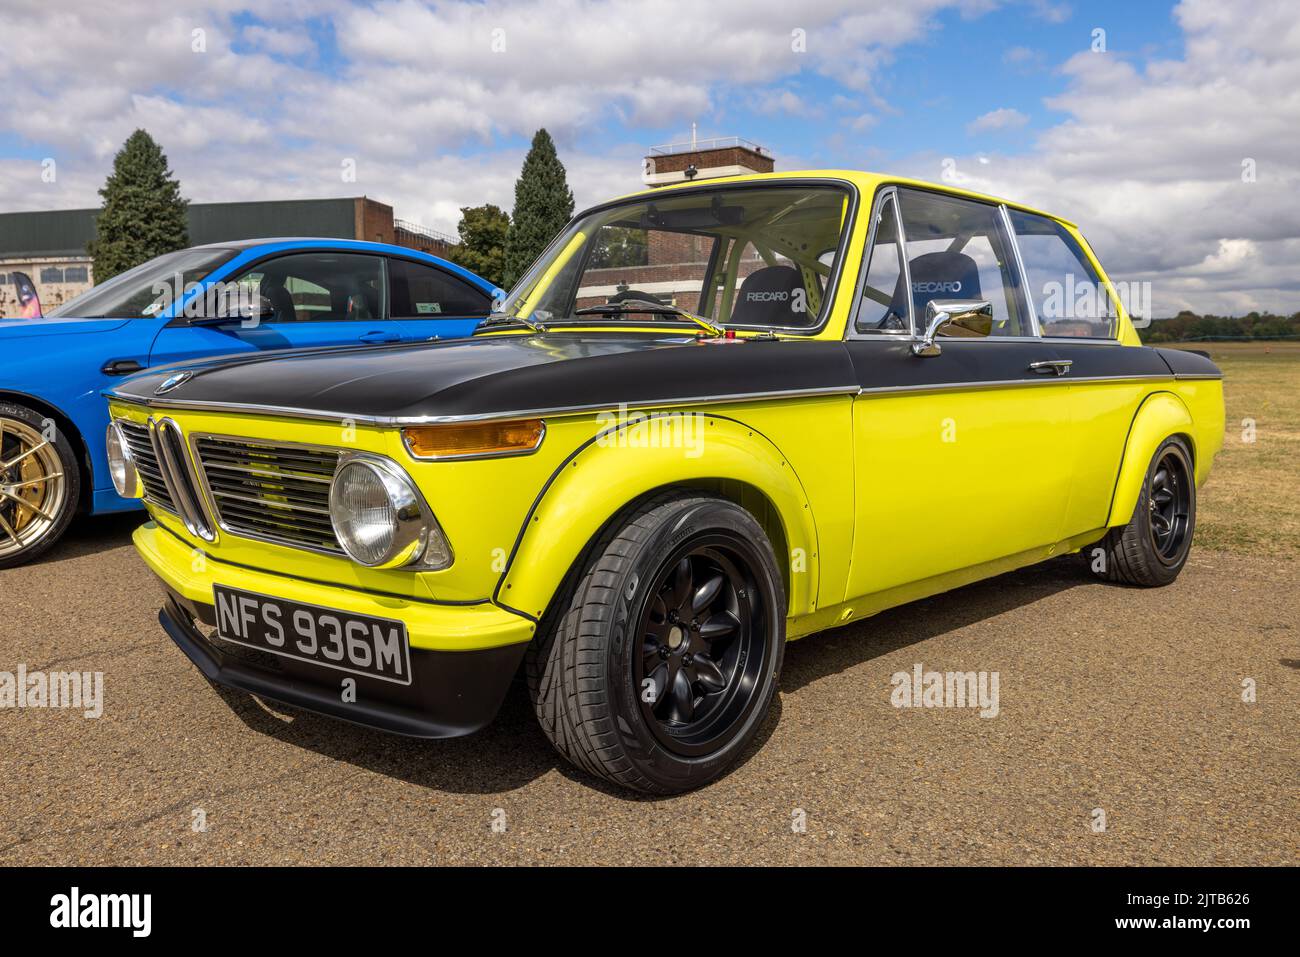 1973 BMW 2002 ‘NFS 936M’ on display at the Bicester Heritage Scramble celebrating 50 years of BMW M Stock Photo